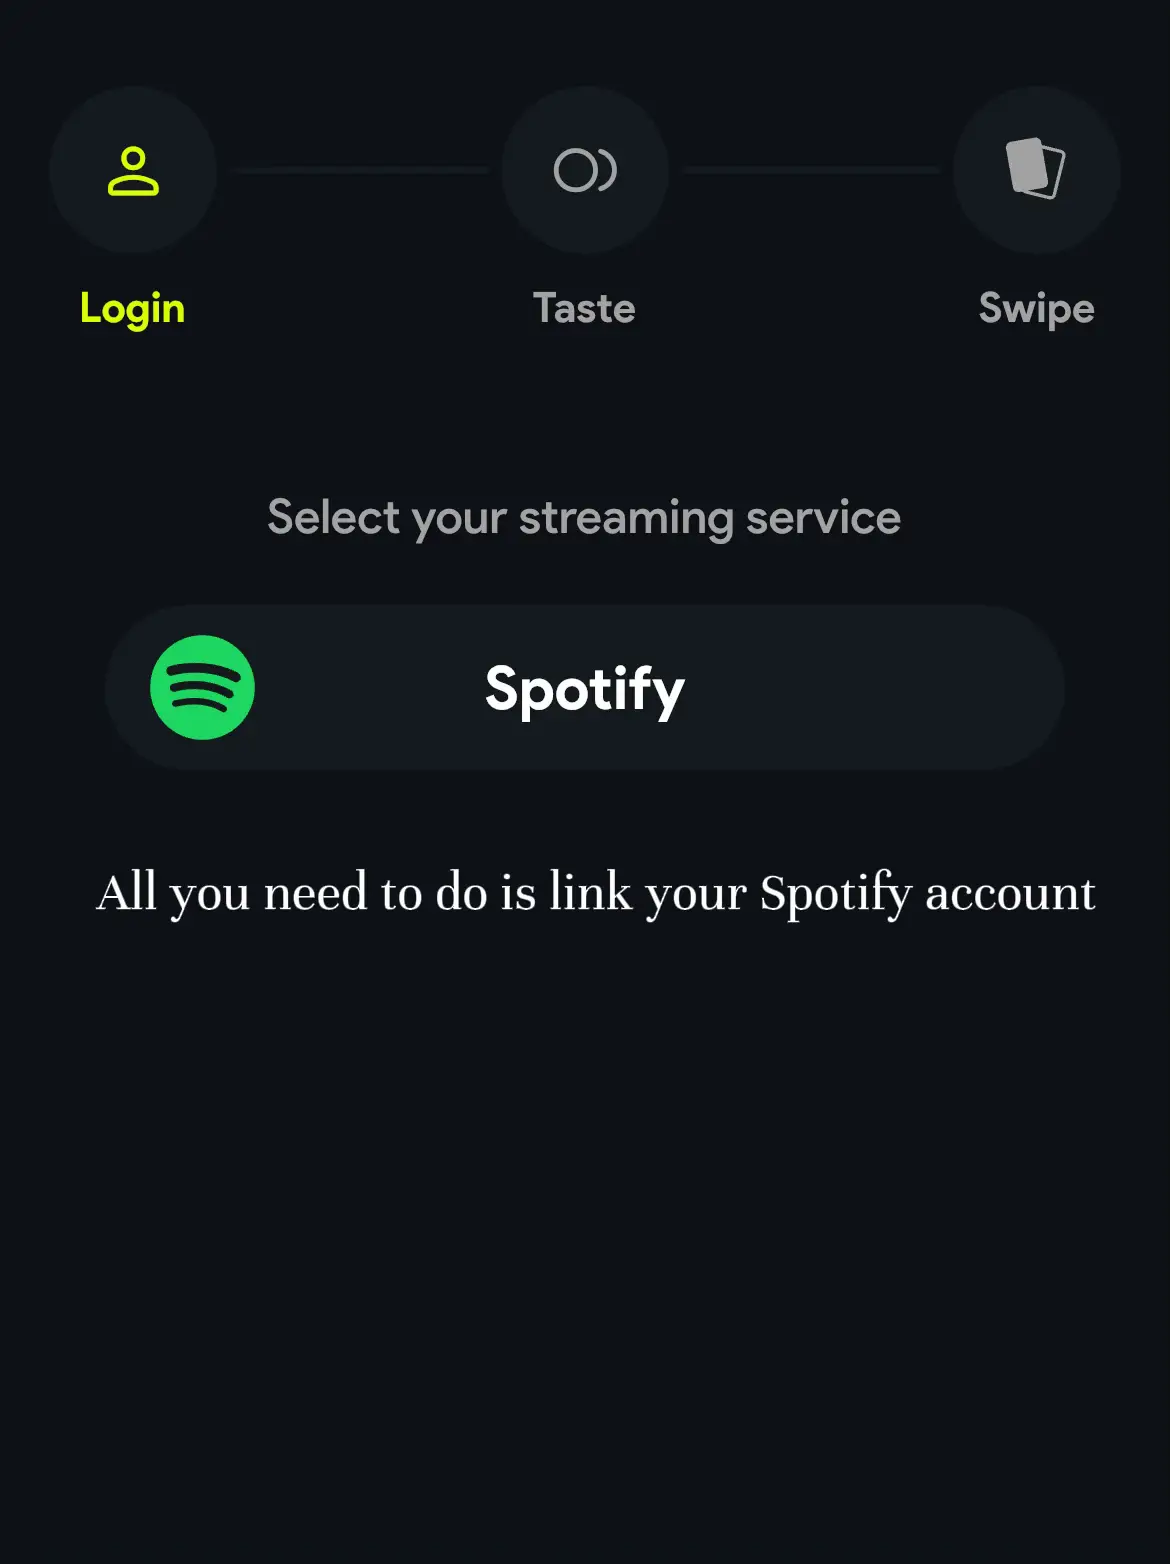  A screen showing a Spotify login page.